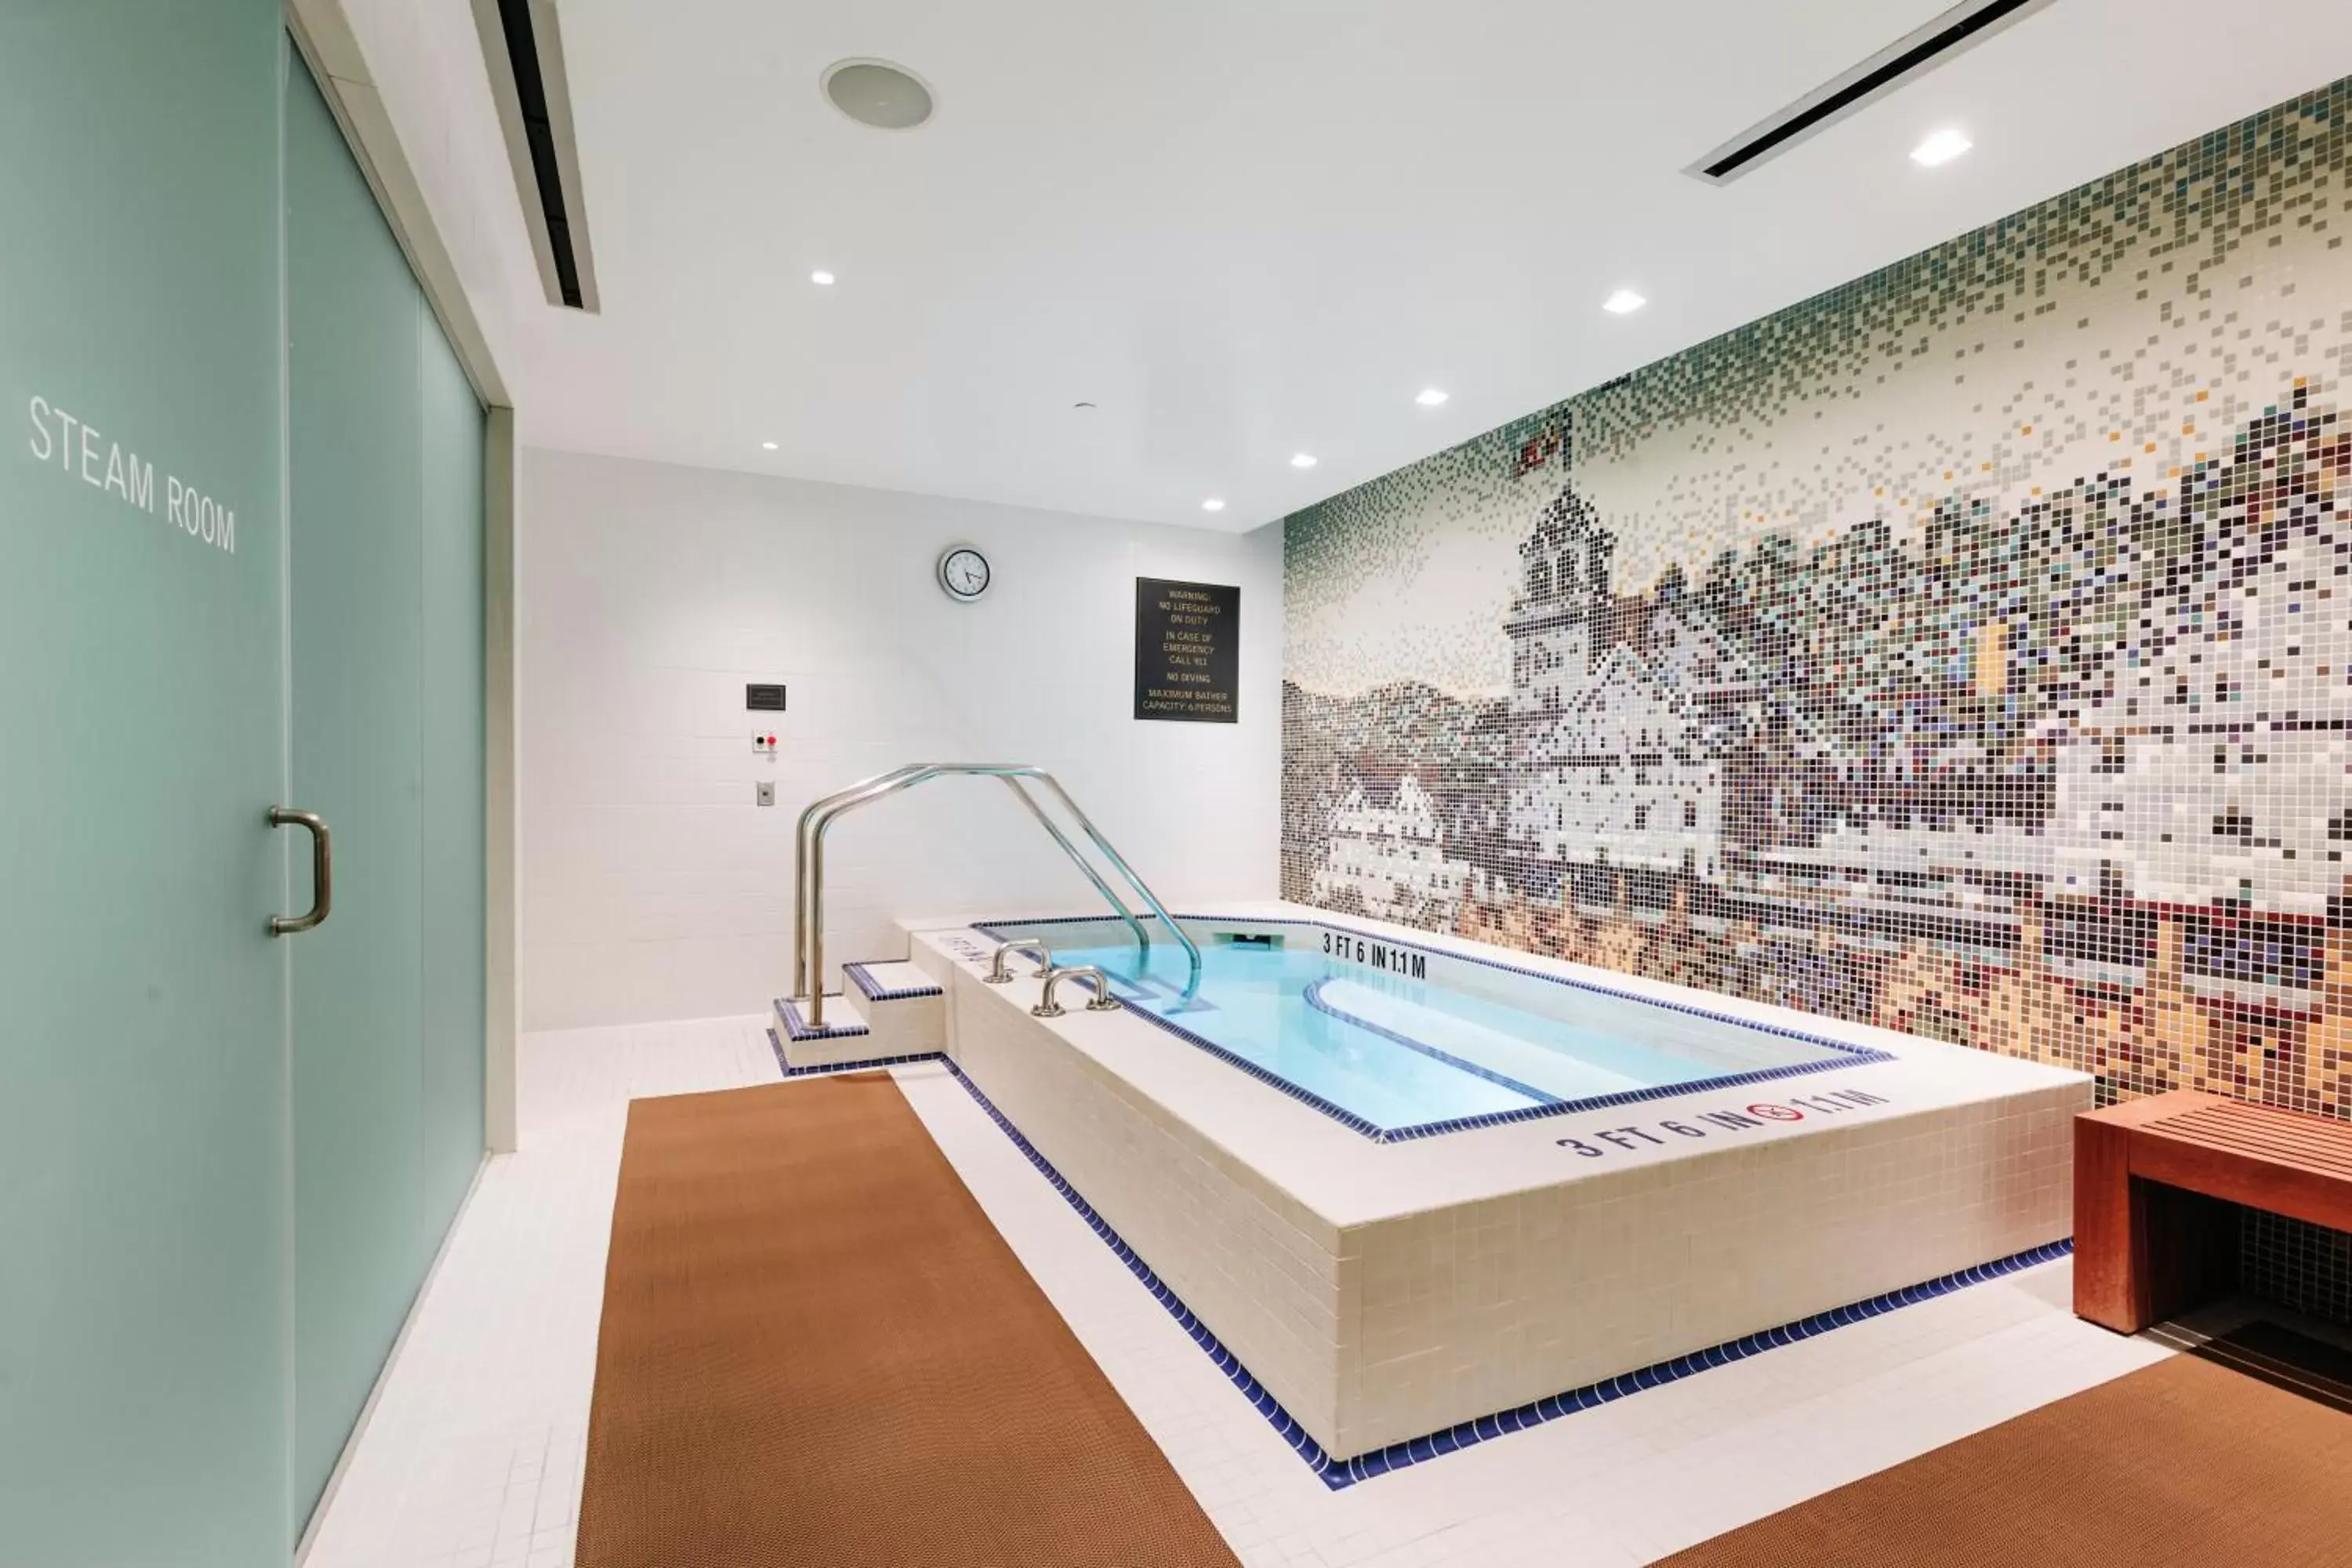 Hot Tub, Swimming Pool in The Claremont Club & Spa, A Fairmont Hotel